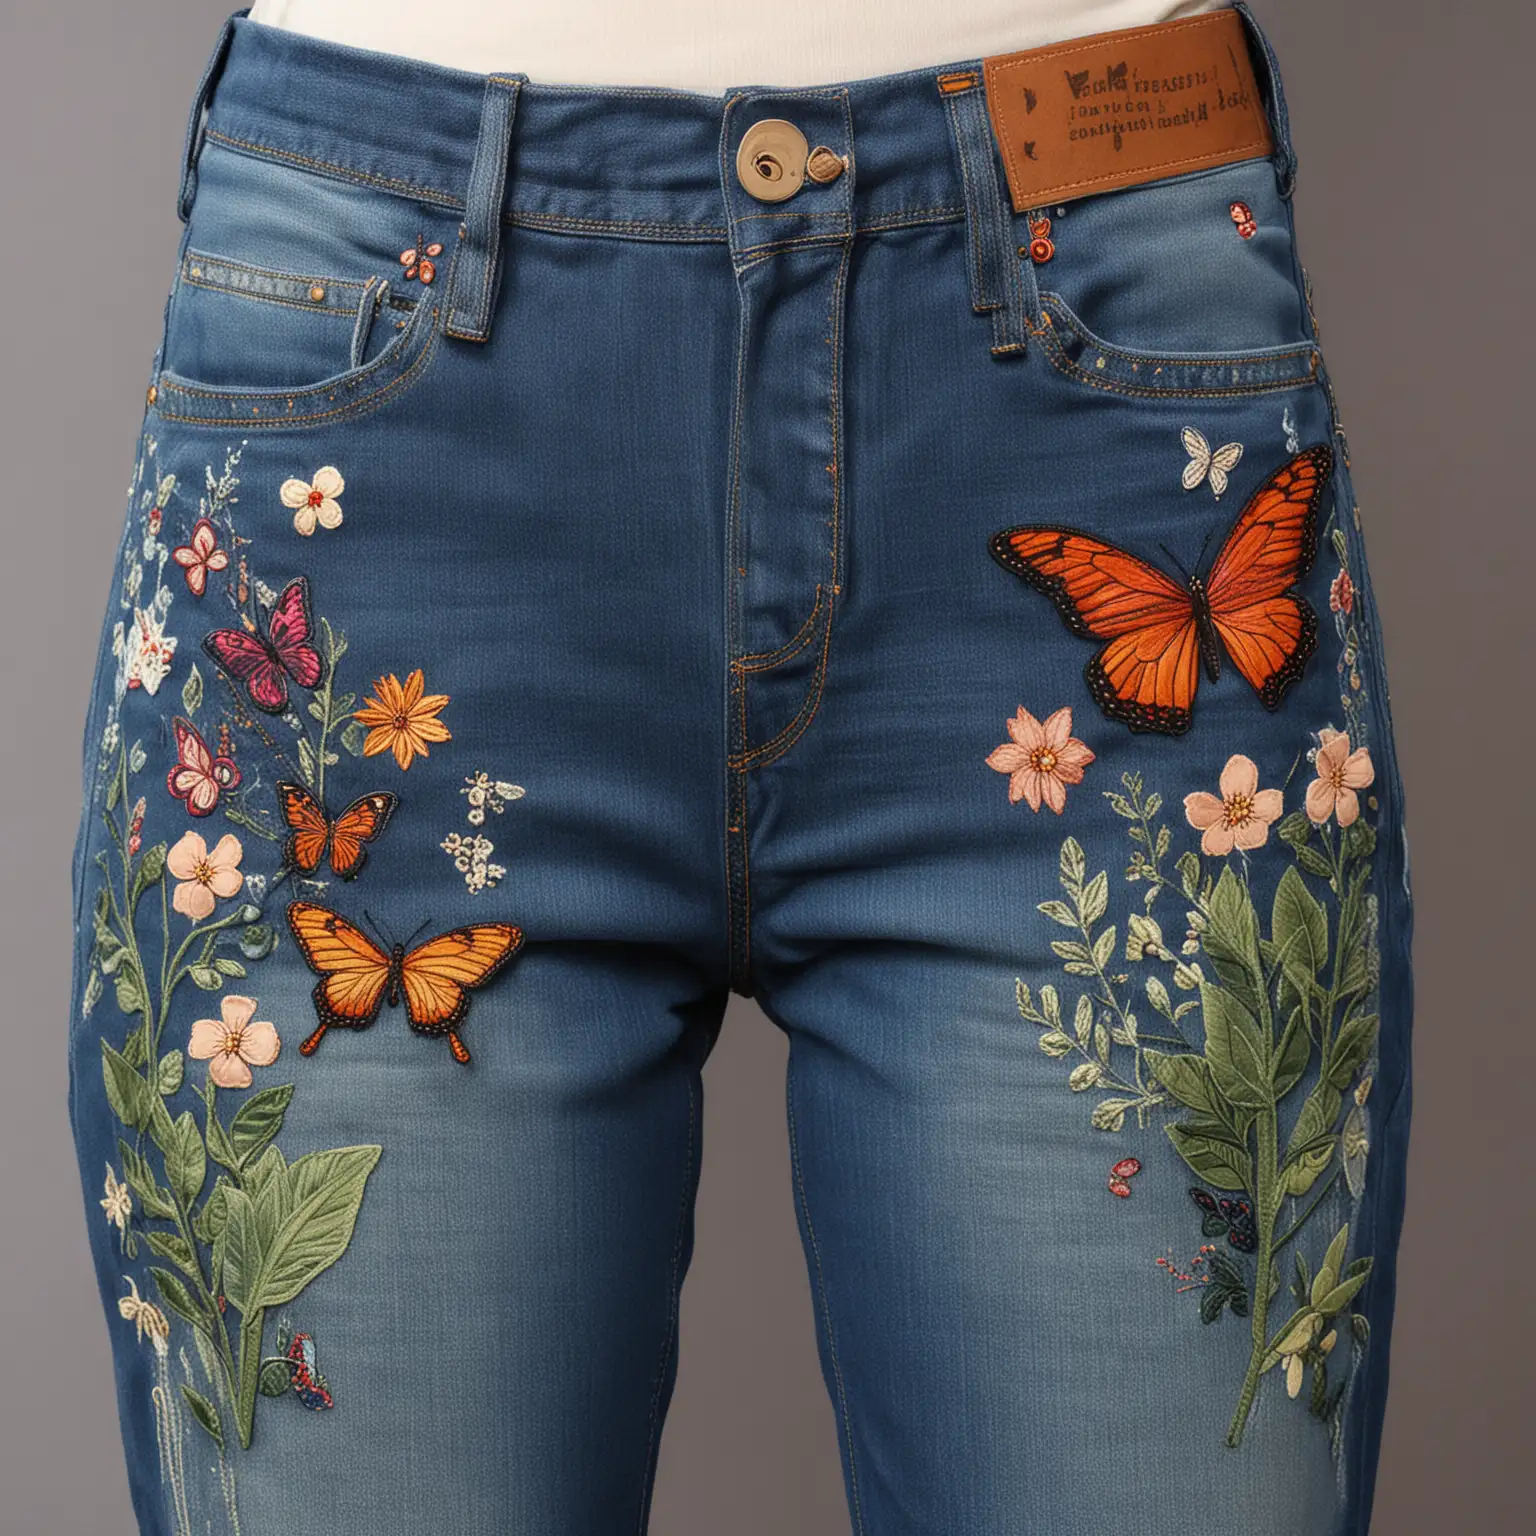 denim for women, with applique patch work, butterflies and plants on front of the jeans and pocket